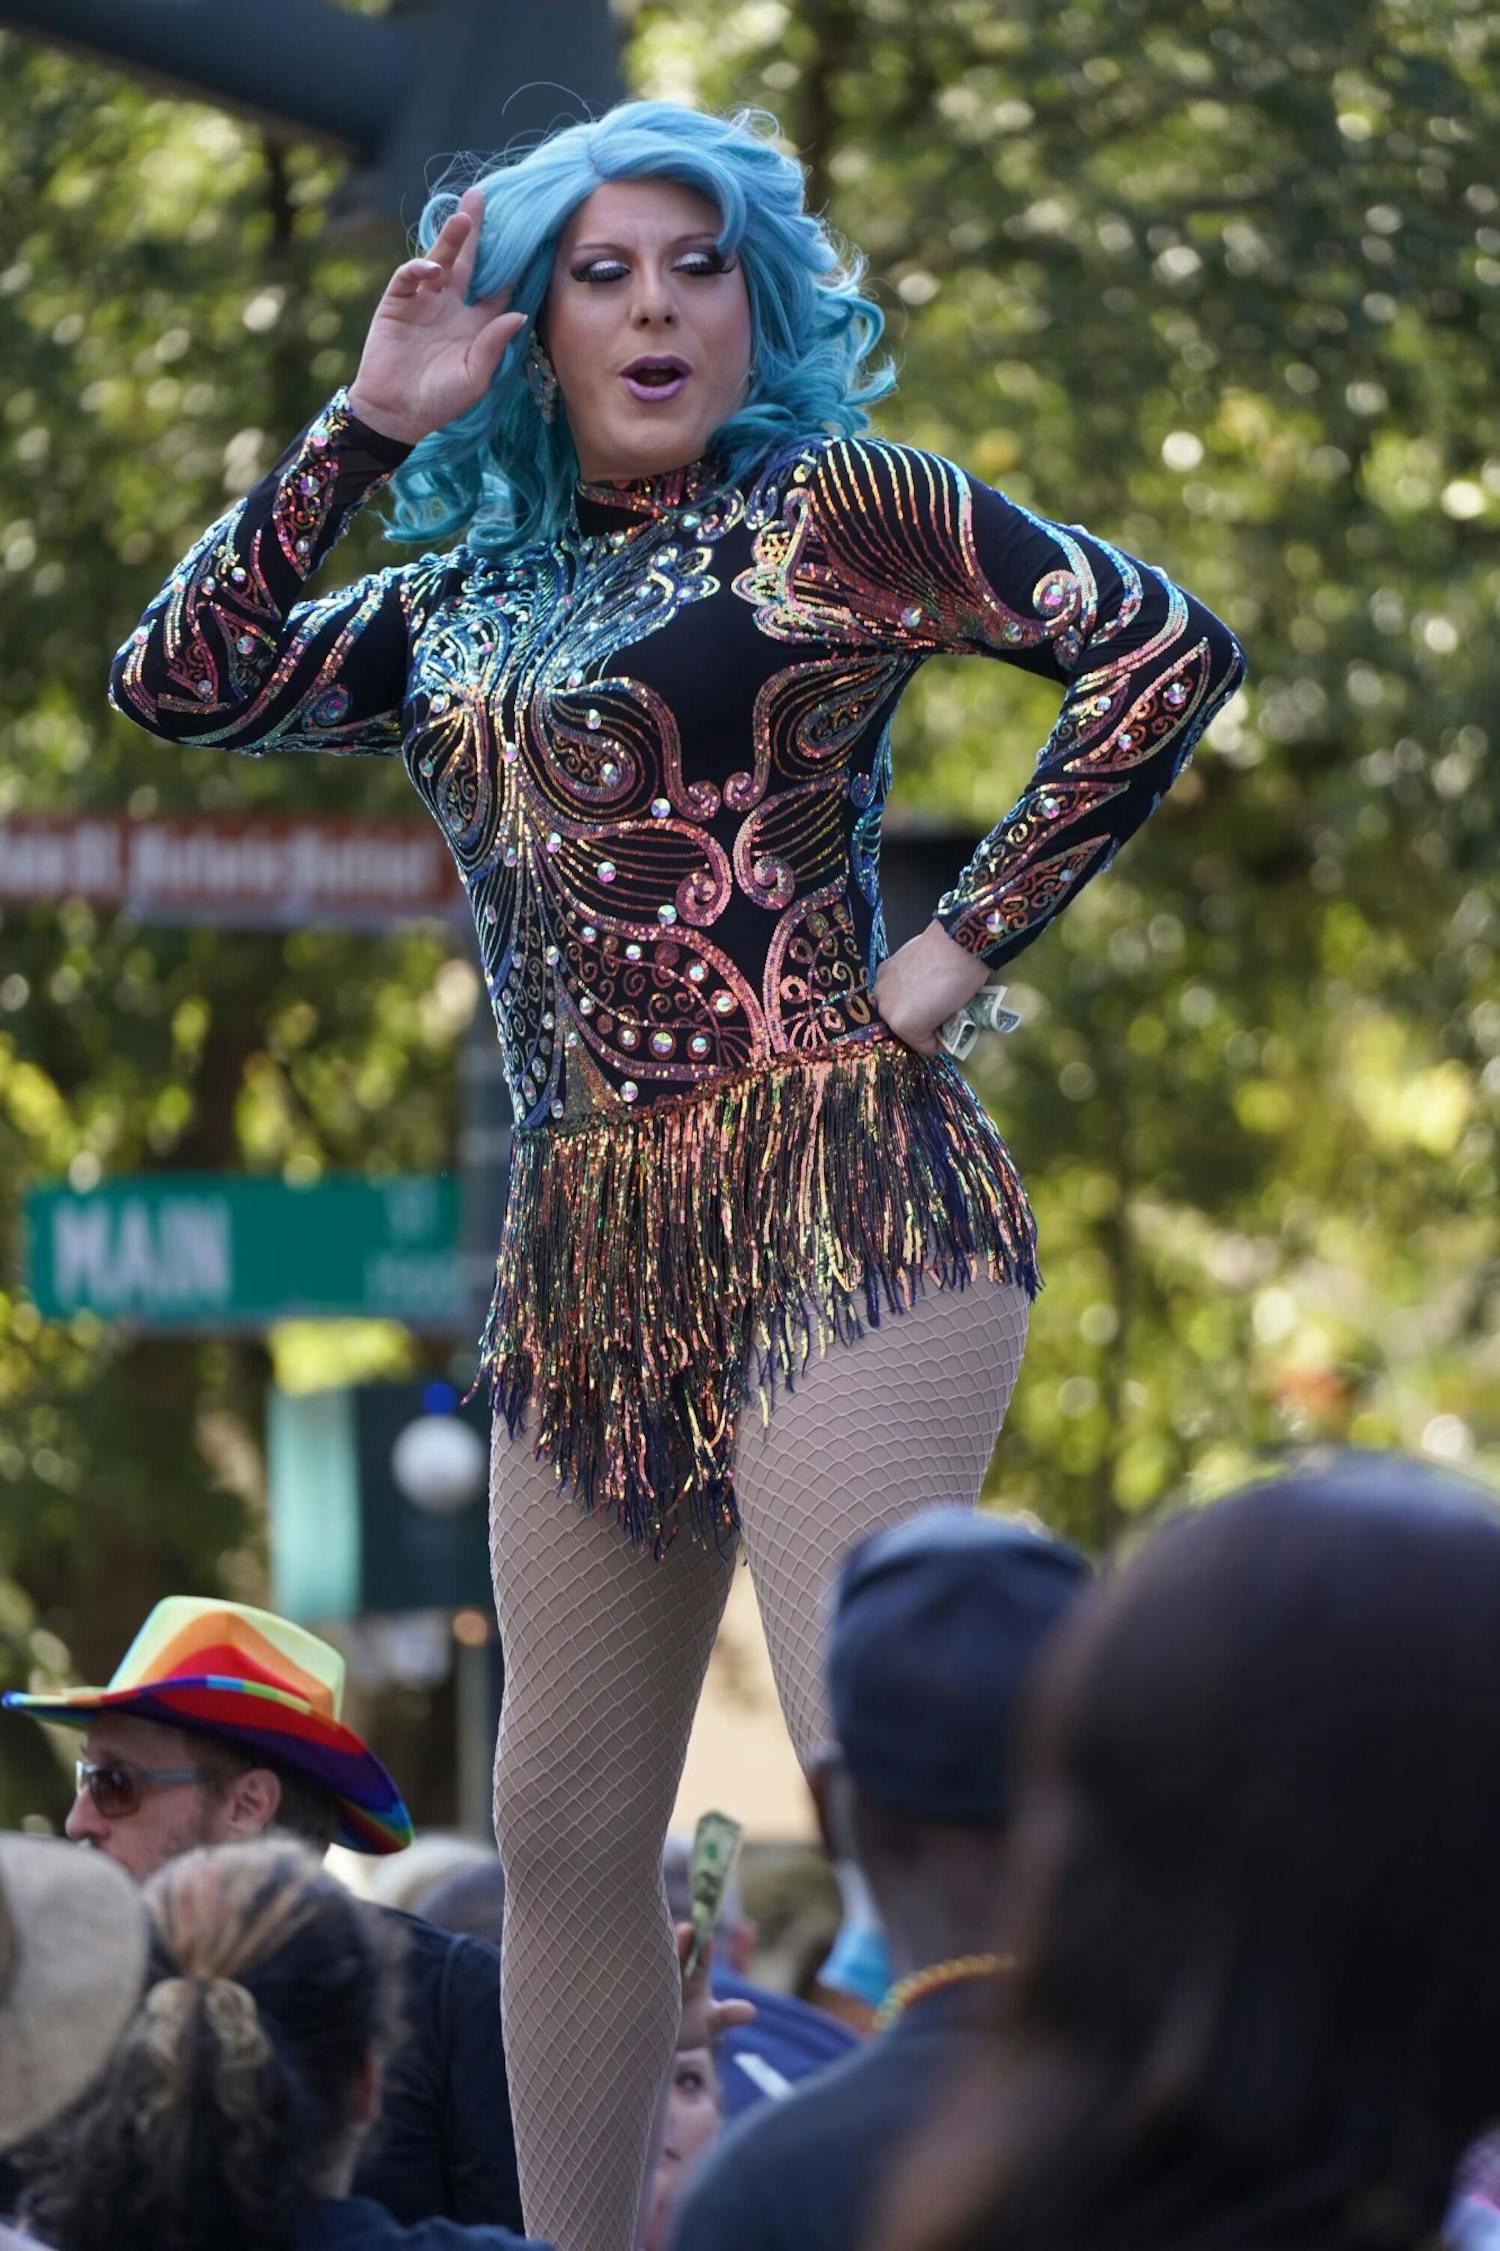 Carla Cox, the entertainment coordinator for South Carolina Pride, gives an on-stage performance. Cox is one of many drag performers to participate in shows at the Famously Hot South Carolina Pride Festival.